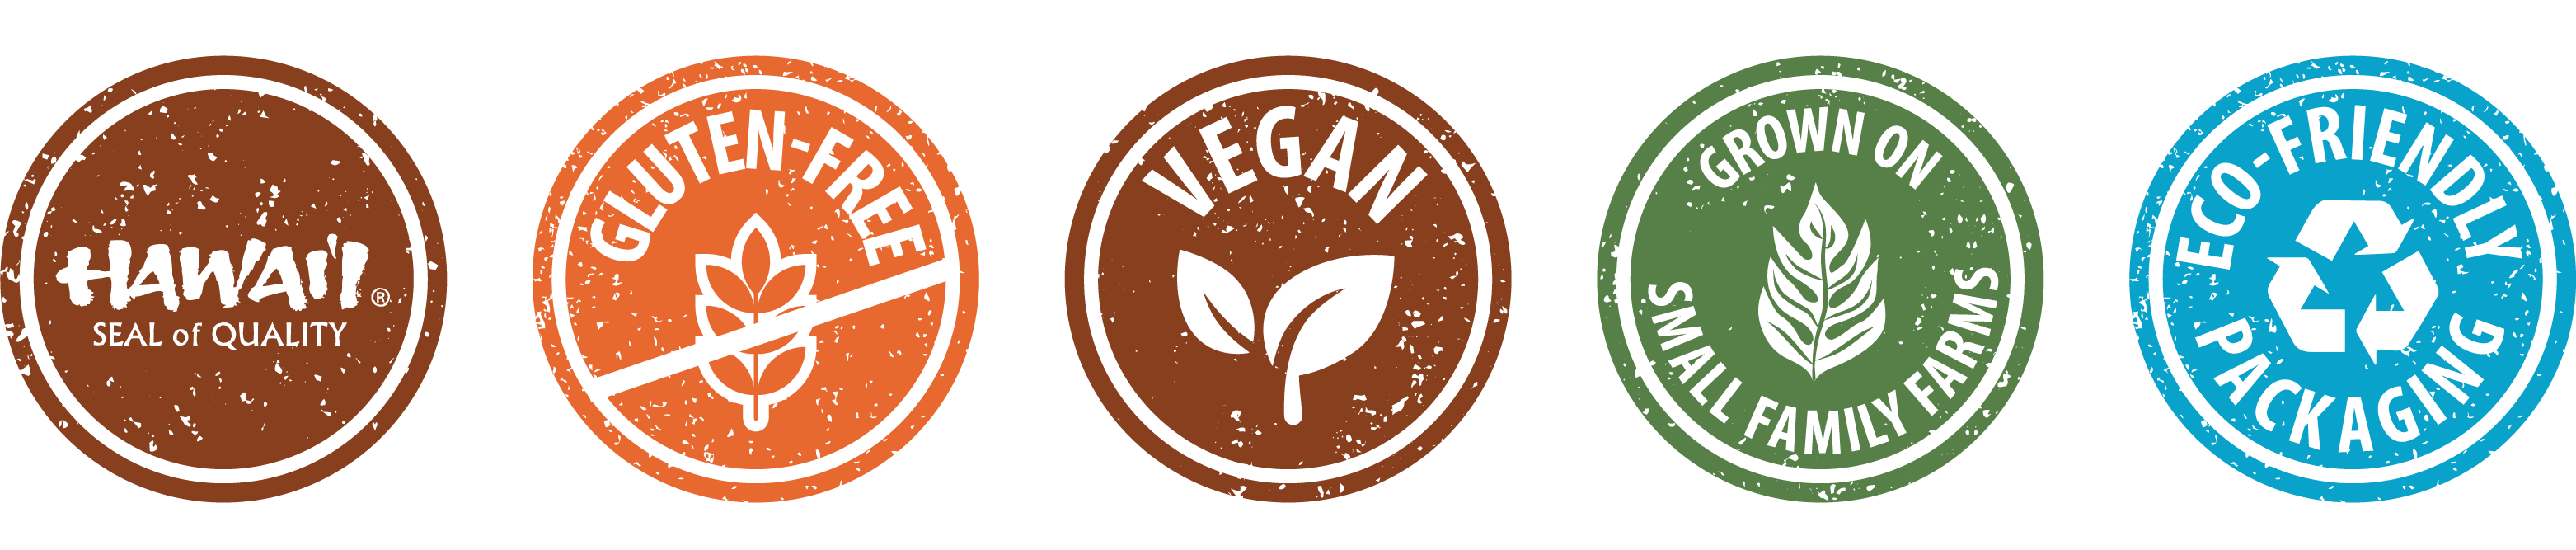 icons: hawaii seal of quality, gluten-free, vegan, grown on small family farms, eco-friendly packaging